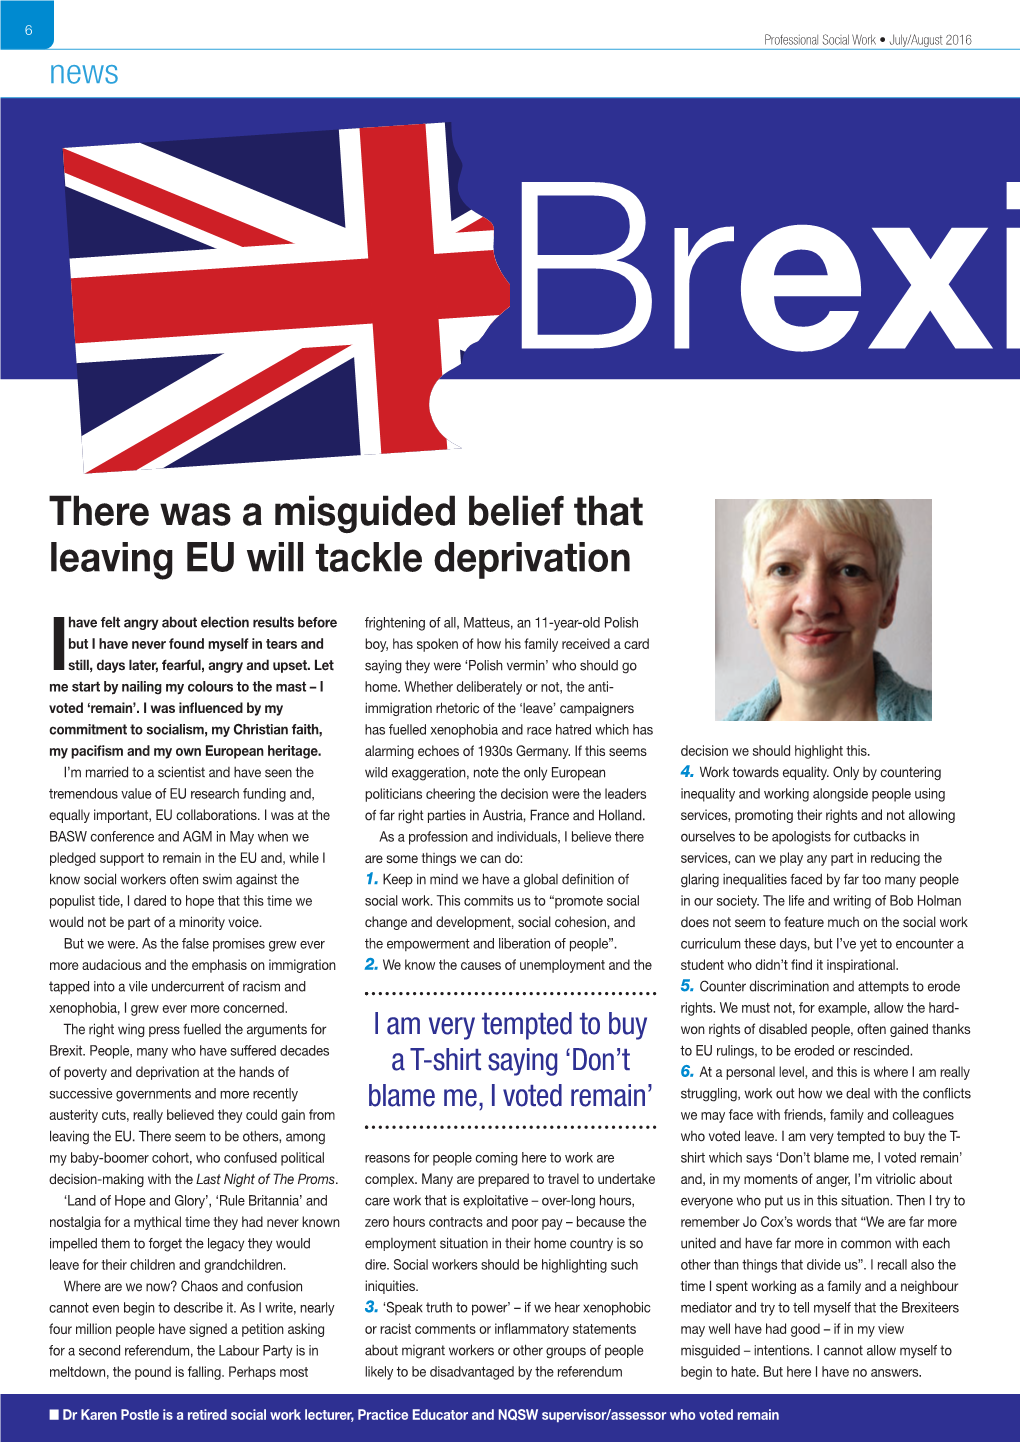 There Was a Misguided Belief That Leaving EU Will Tackle Deprivation